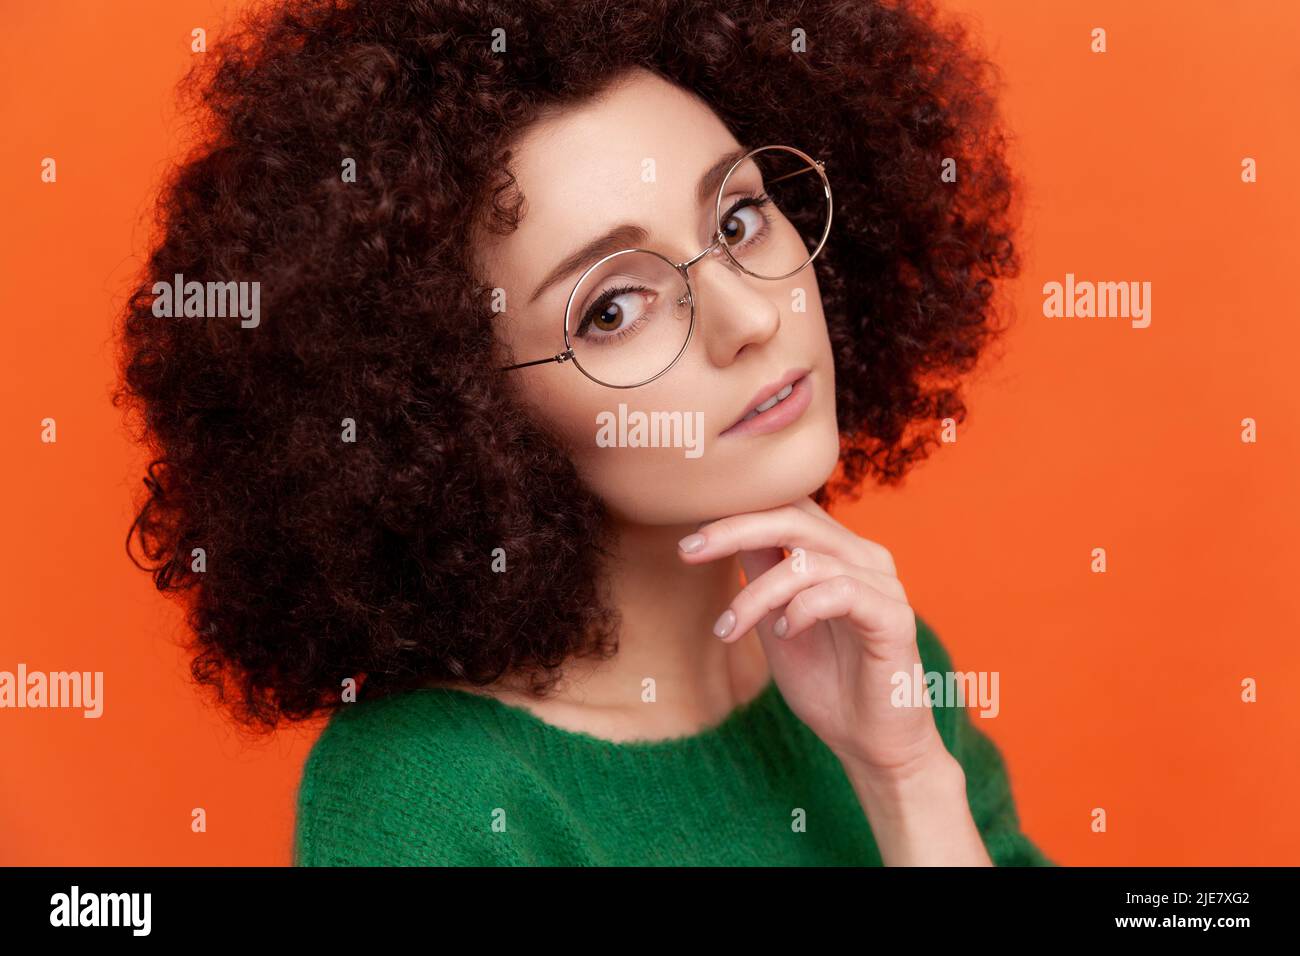 Closeup portrait of pleasant looking woman with Afro hairstyle wearing green casual style sweater and eyeglasses, keeping hand under chin. Indoor studio shot isolated on orange background. Stock Photo